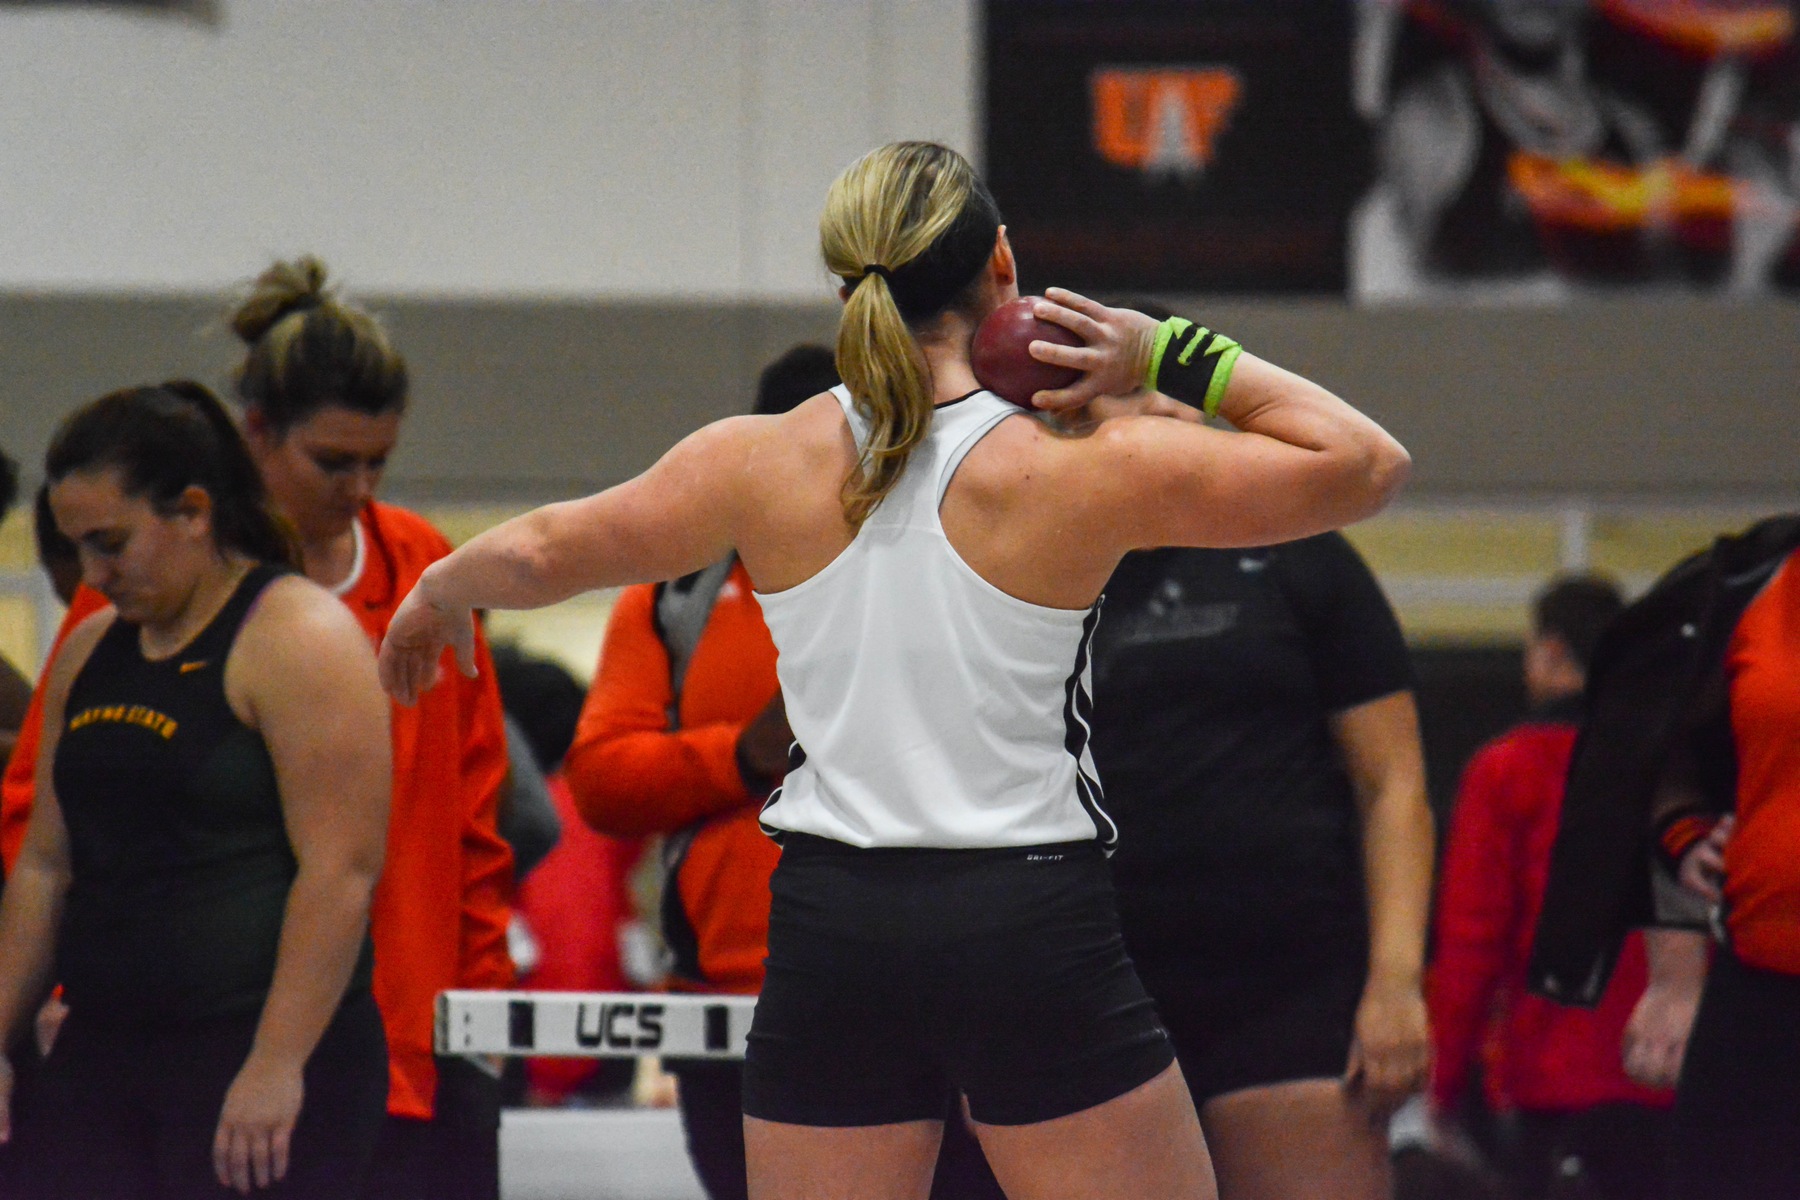 Throwers Wrap Up Last Chance Meet